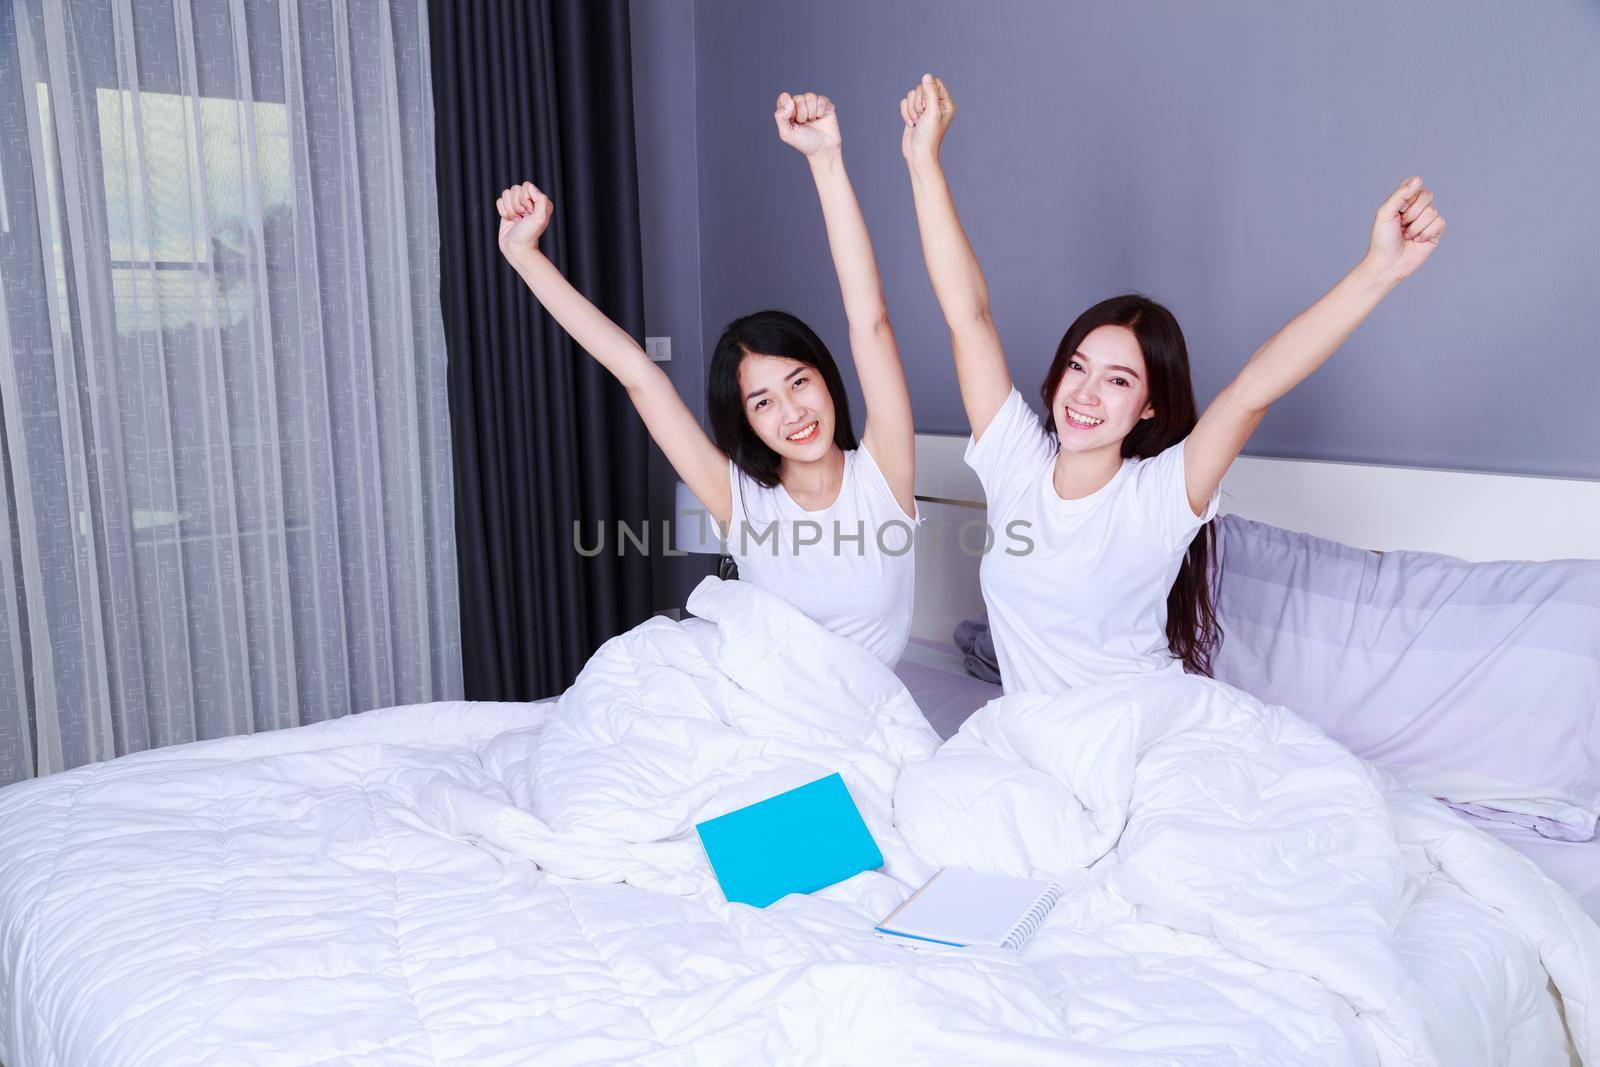 best friend woman with arms raised on bed in the bedroom